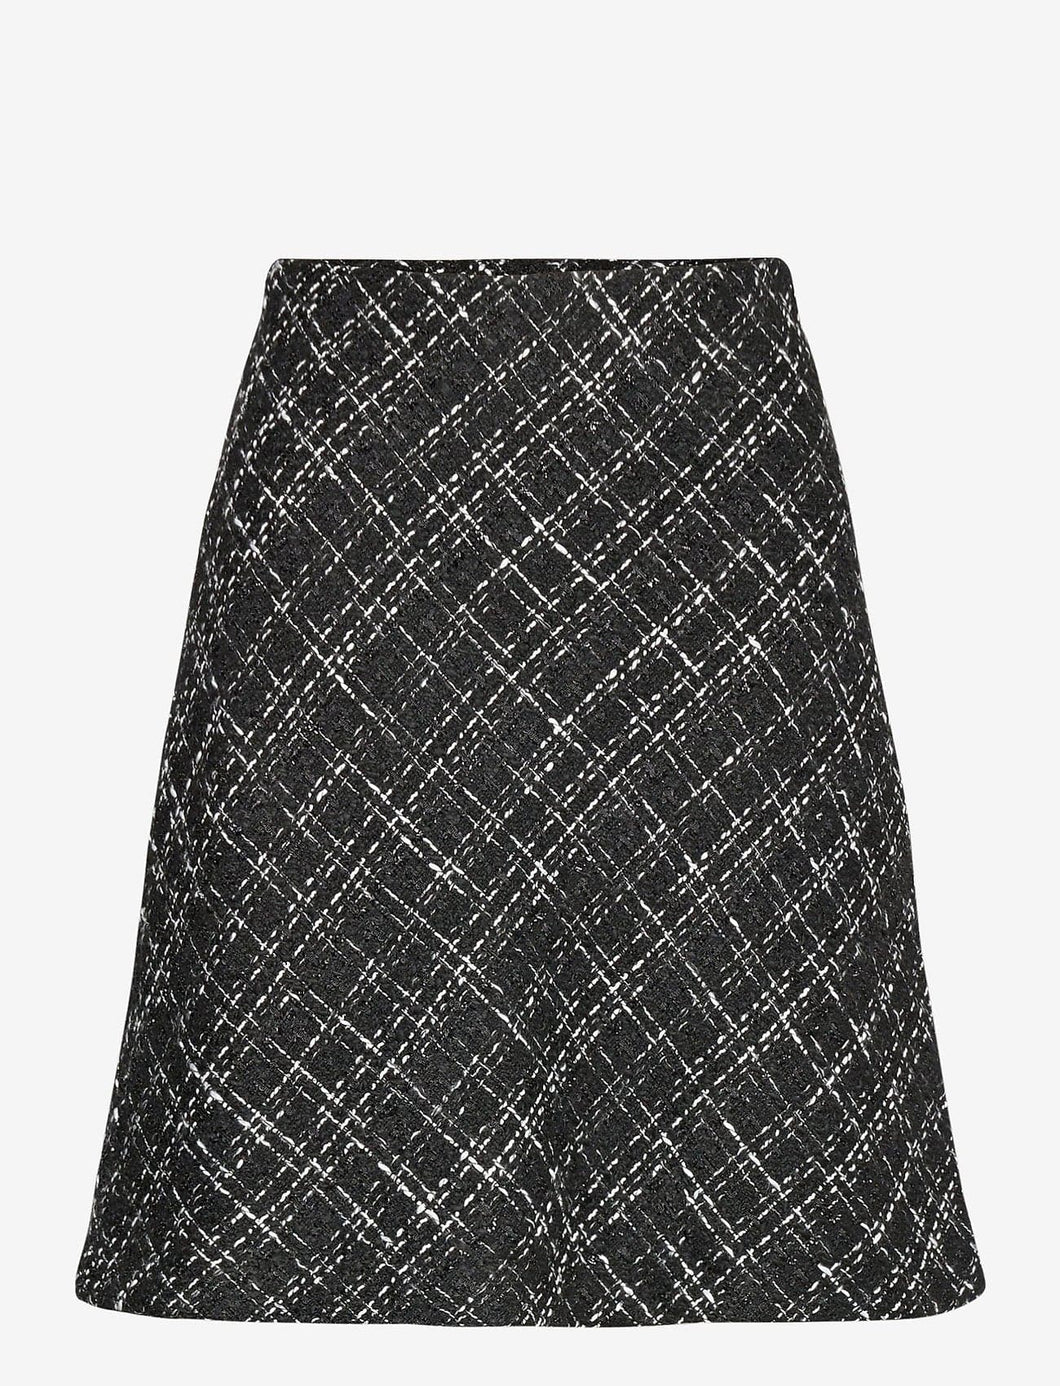 BYoung Textured Check A-Line Skirt